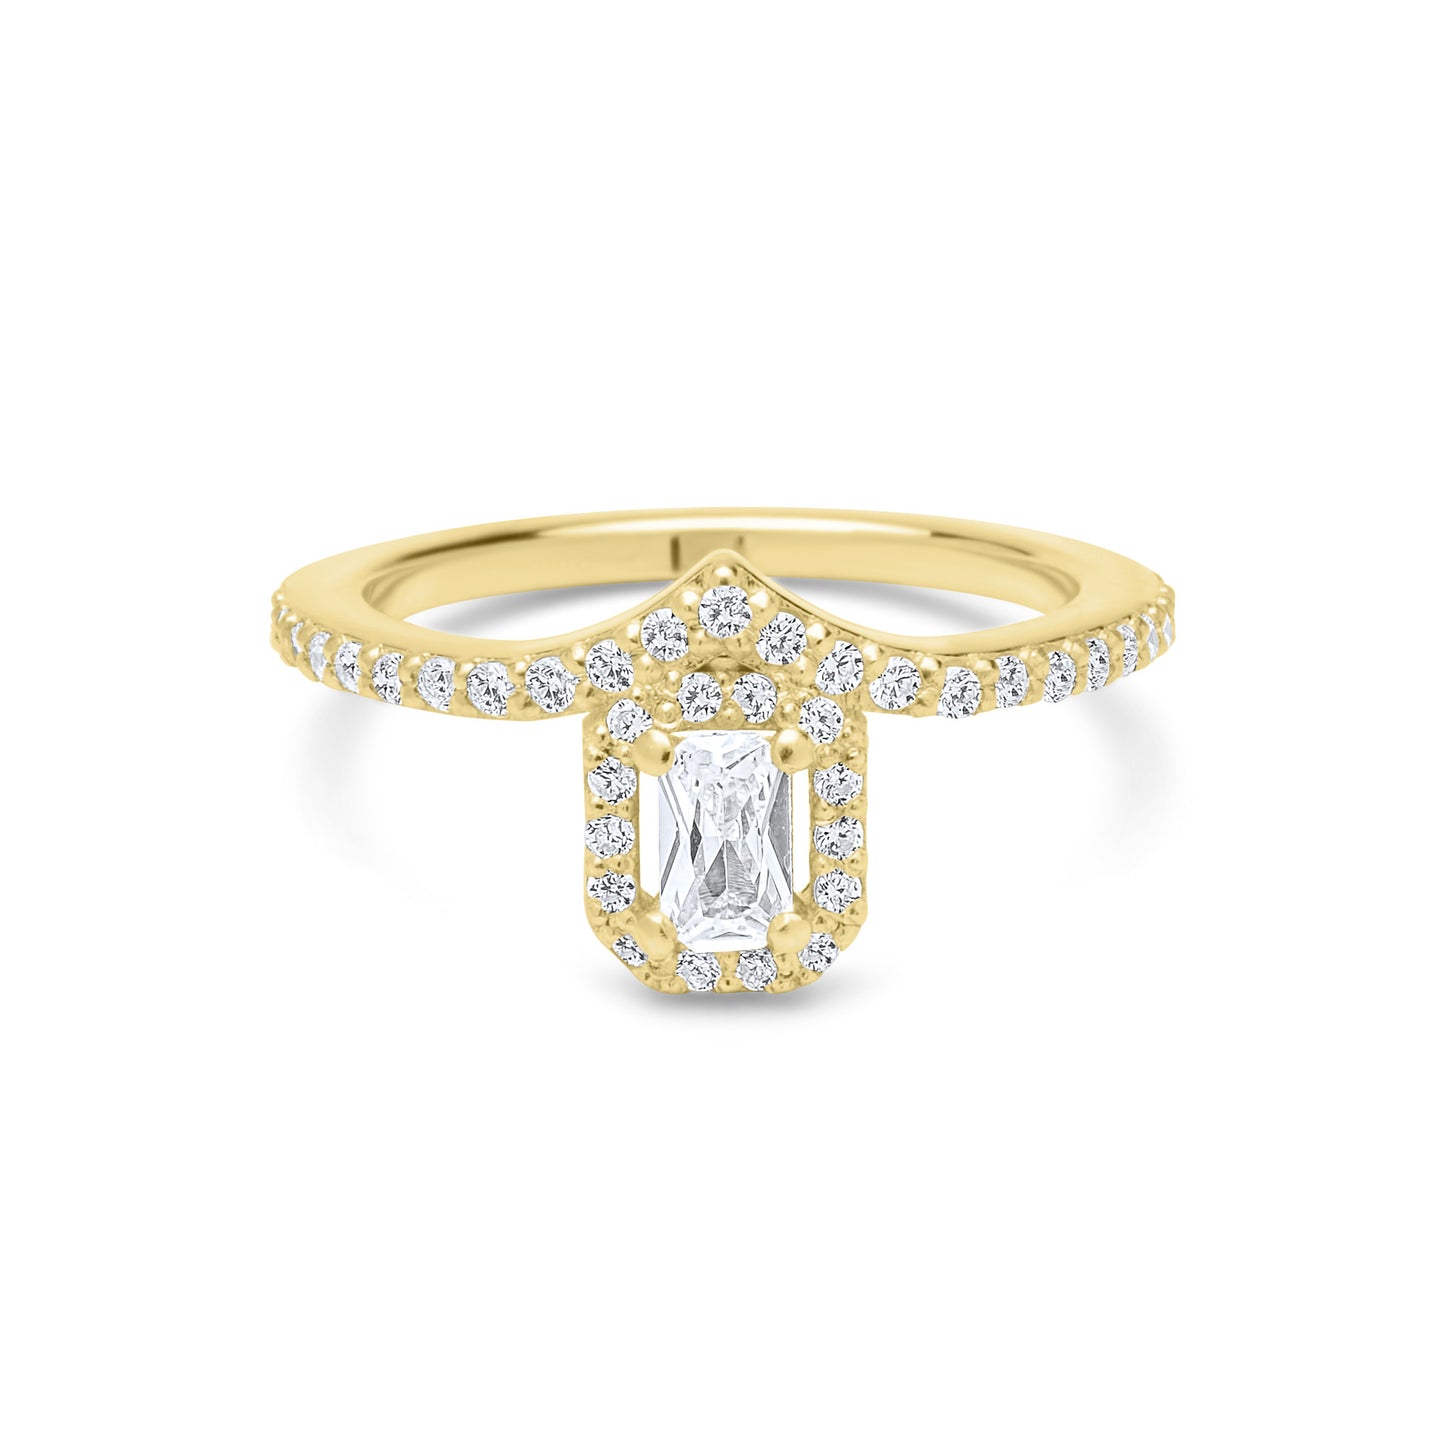 White Emerald Cut V Ring - Gold Plated